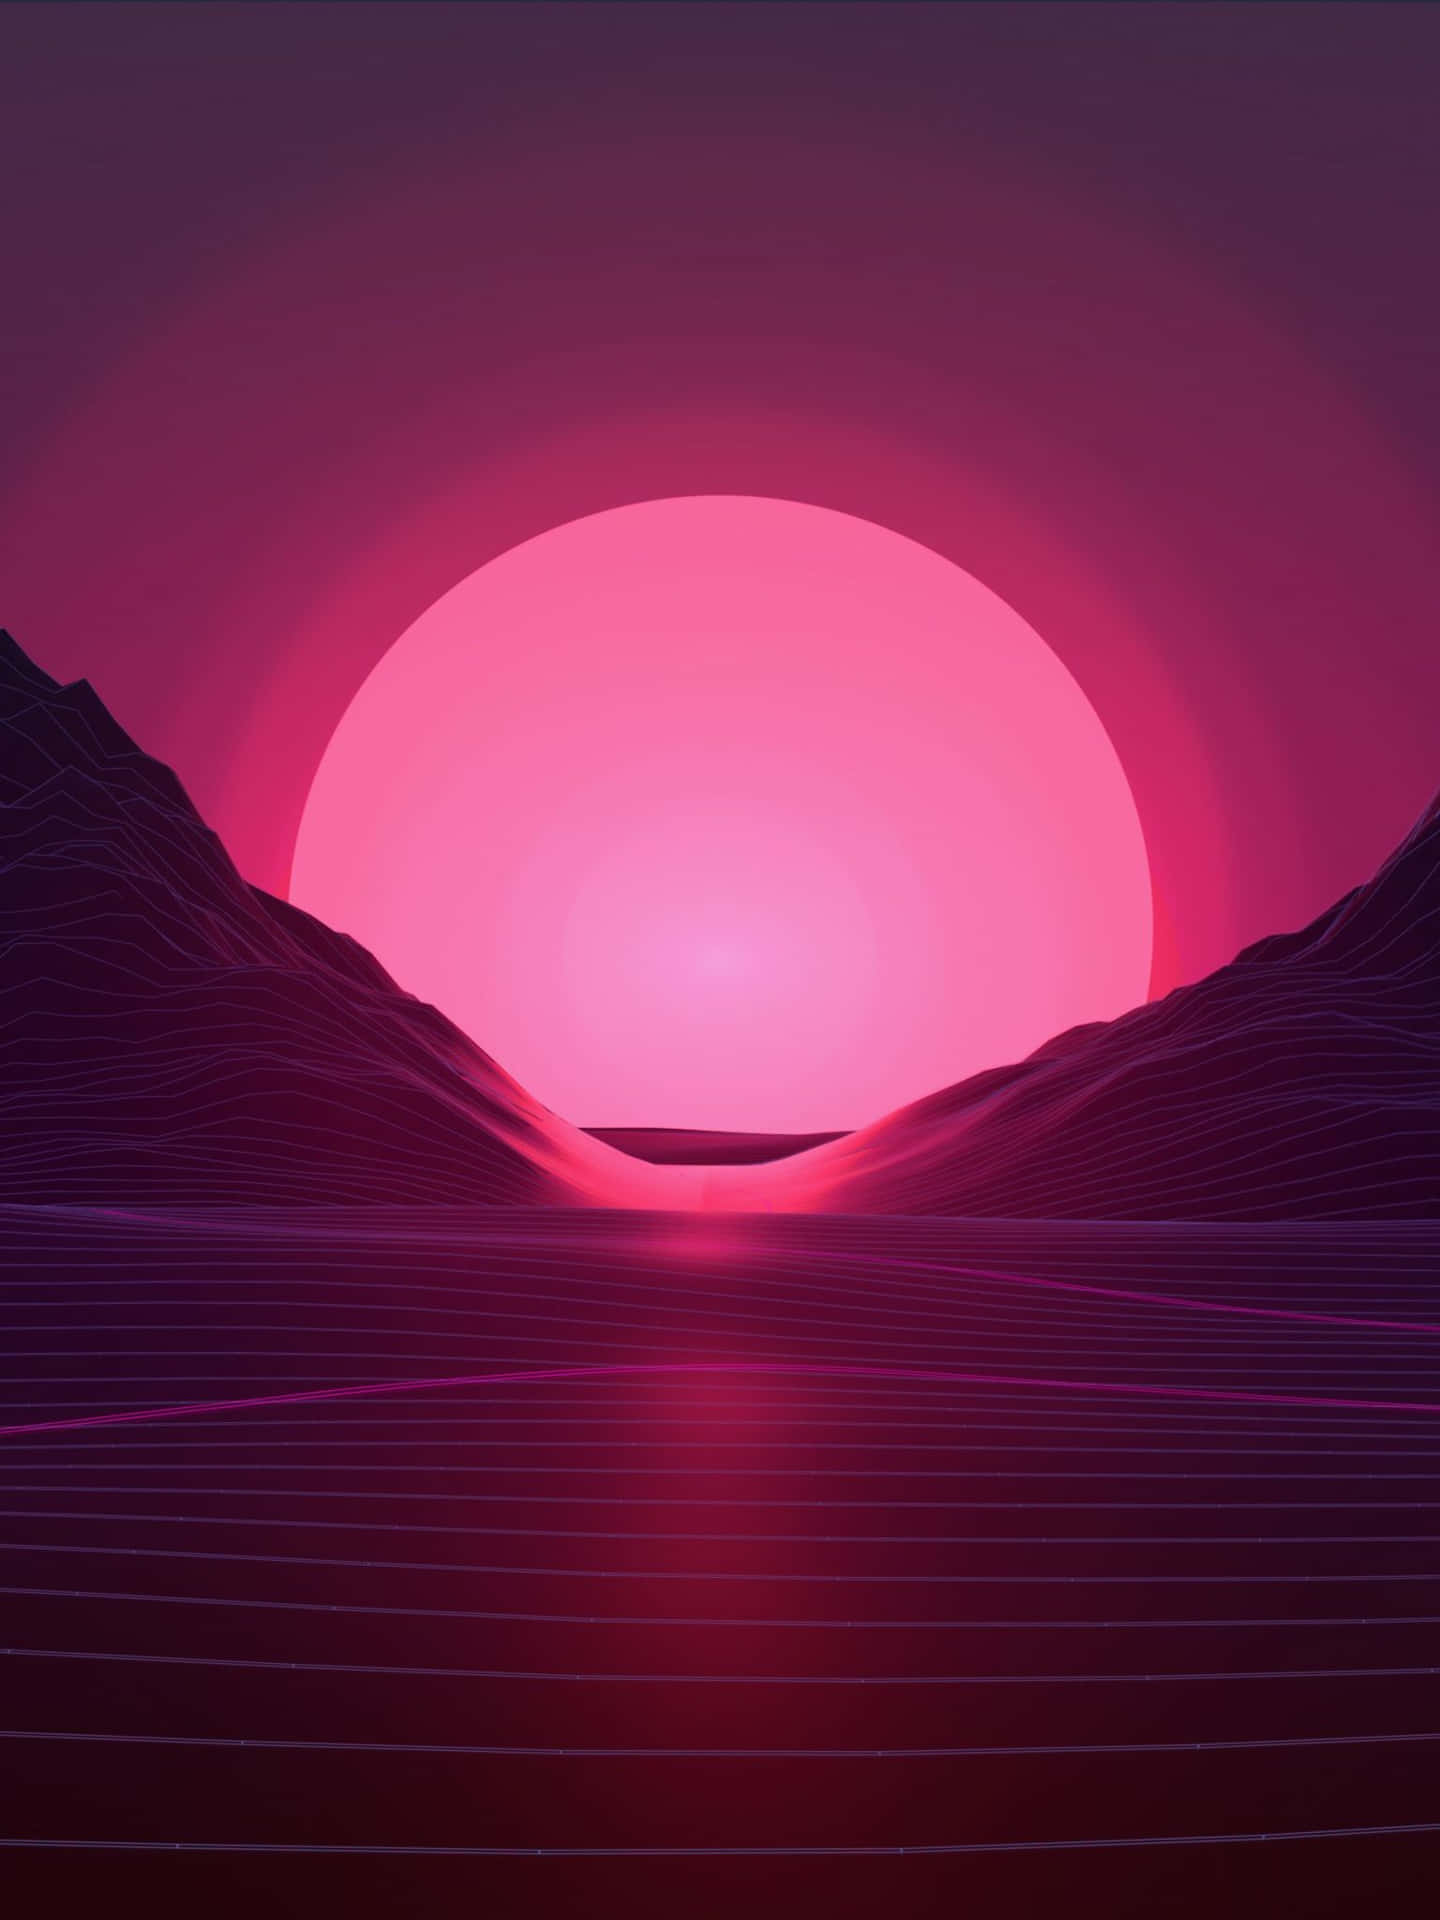 A Pink Sunset With A Mountain In The Background Wallpaper